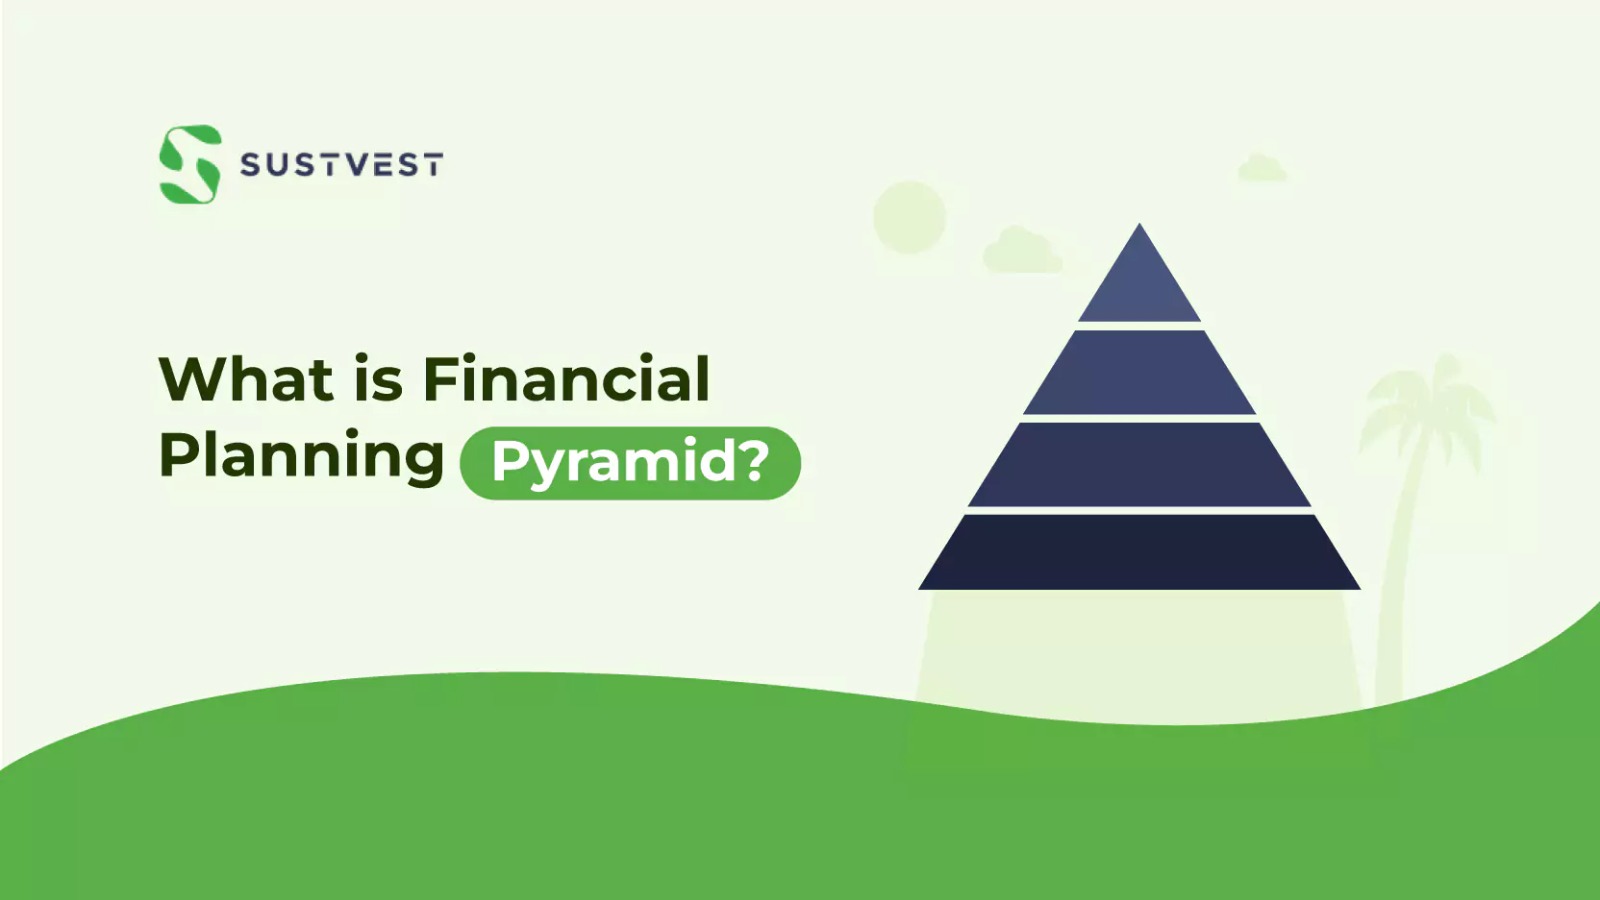 About Financial planning pyramid